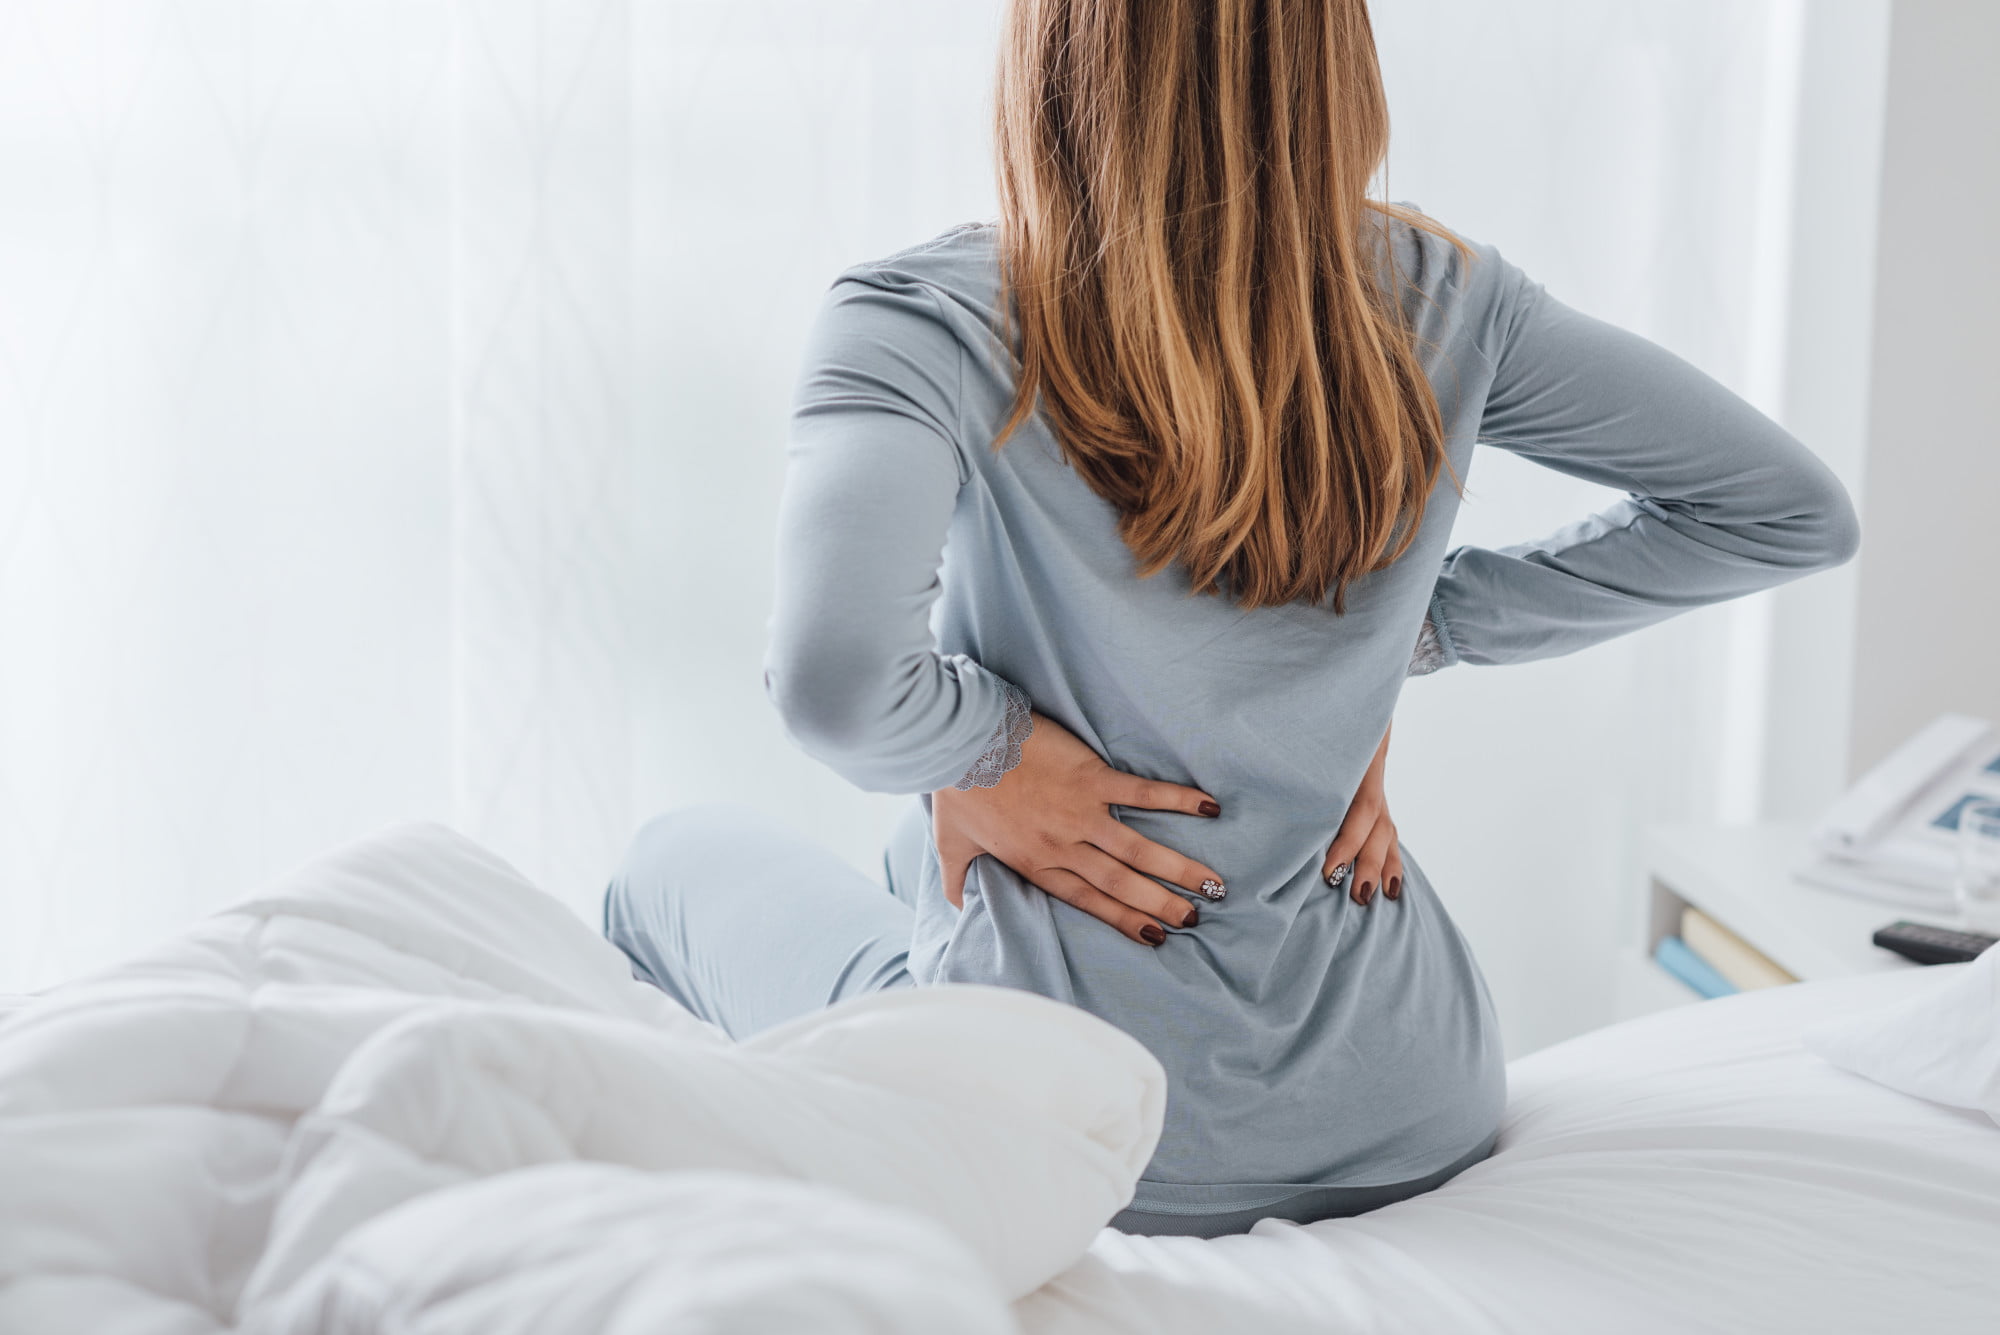 Are you feeling the pain? Are you worried about a lumbar sprain? Read this article to learn about the symptoms and your treatment options.